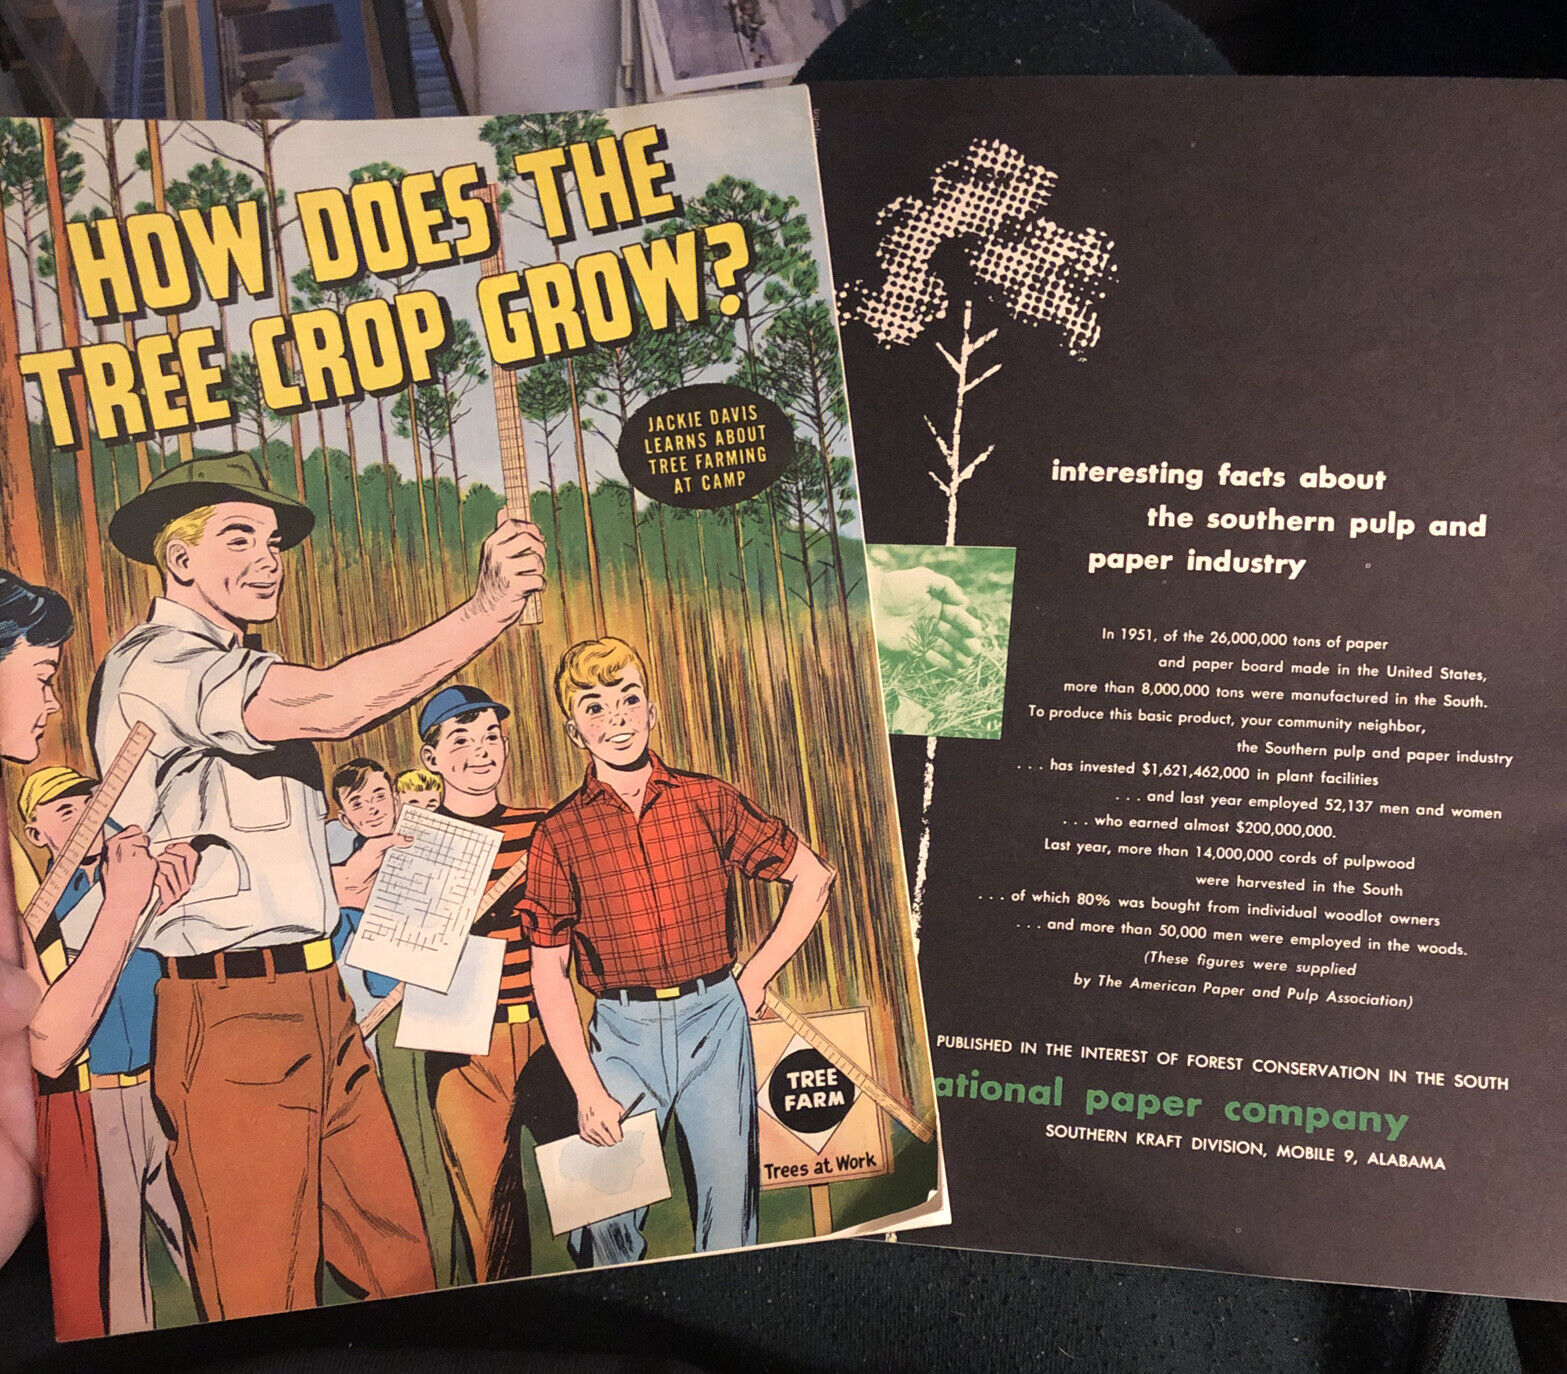 Vintage Comic Teachers Guide How Does the Tree Crop Grow? International Paper Co